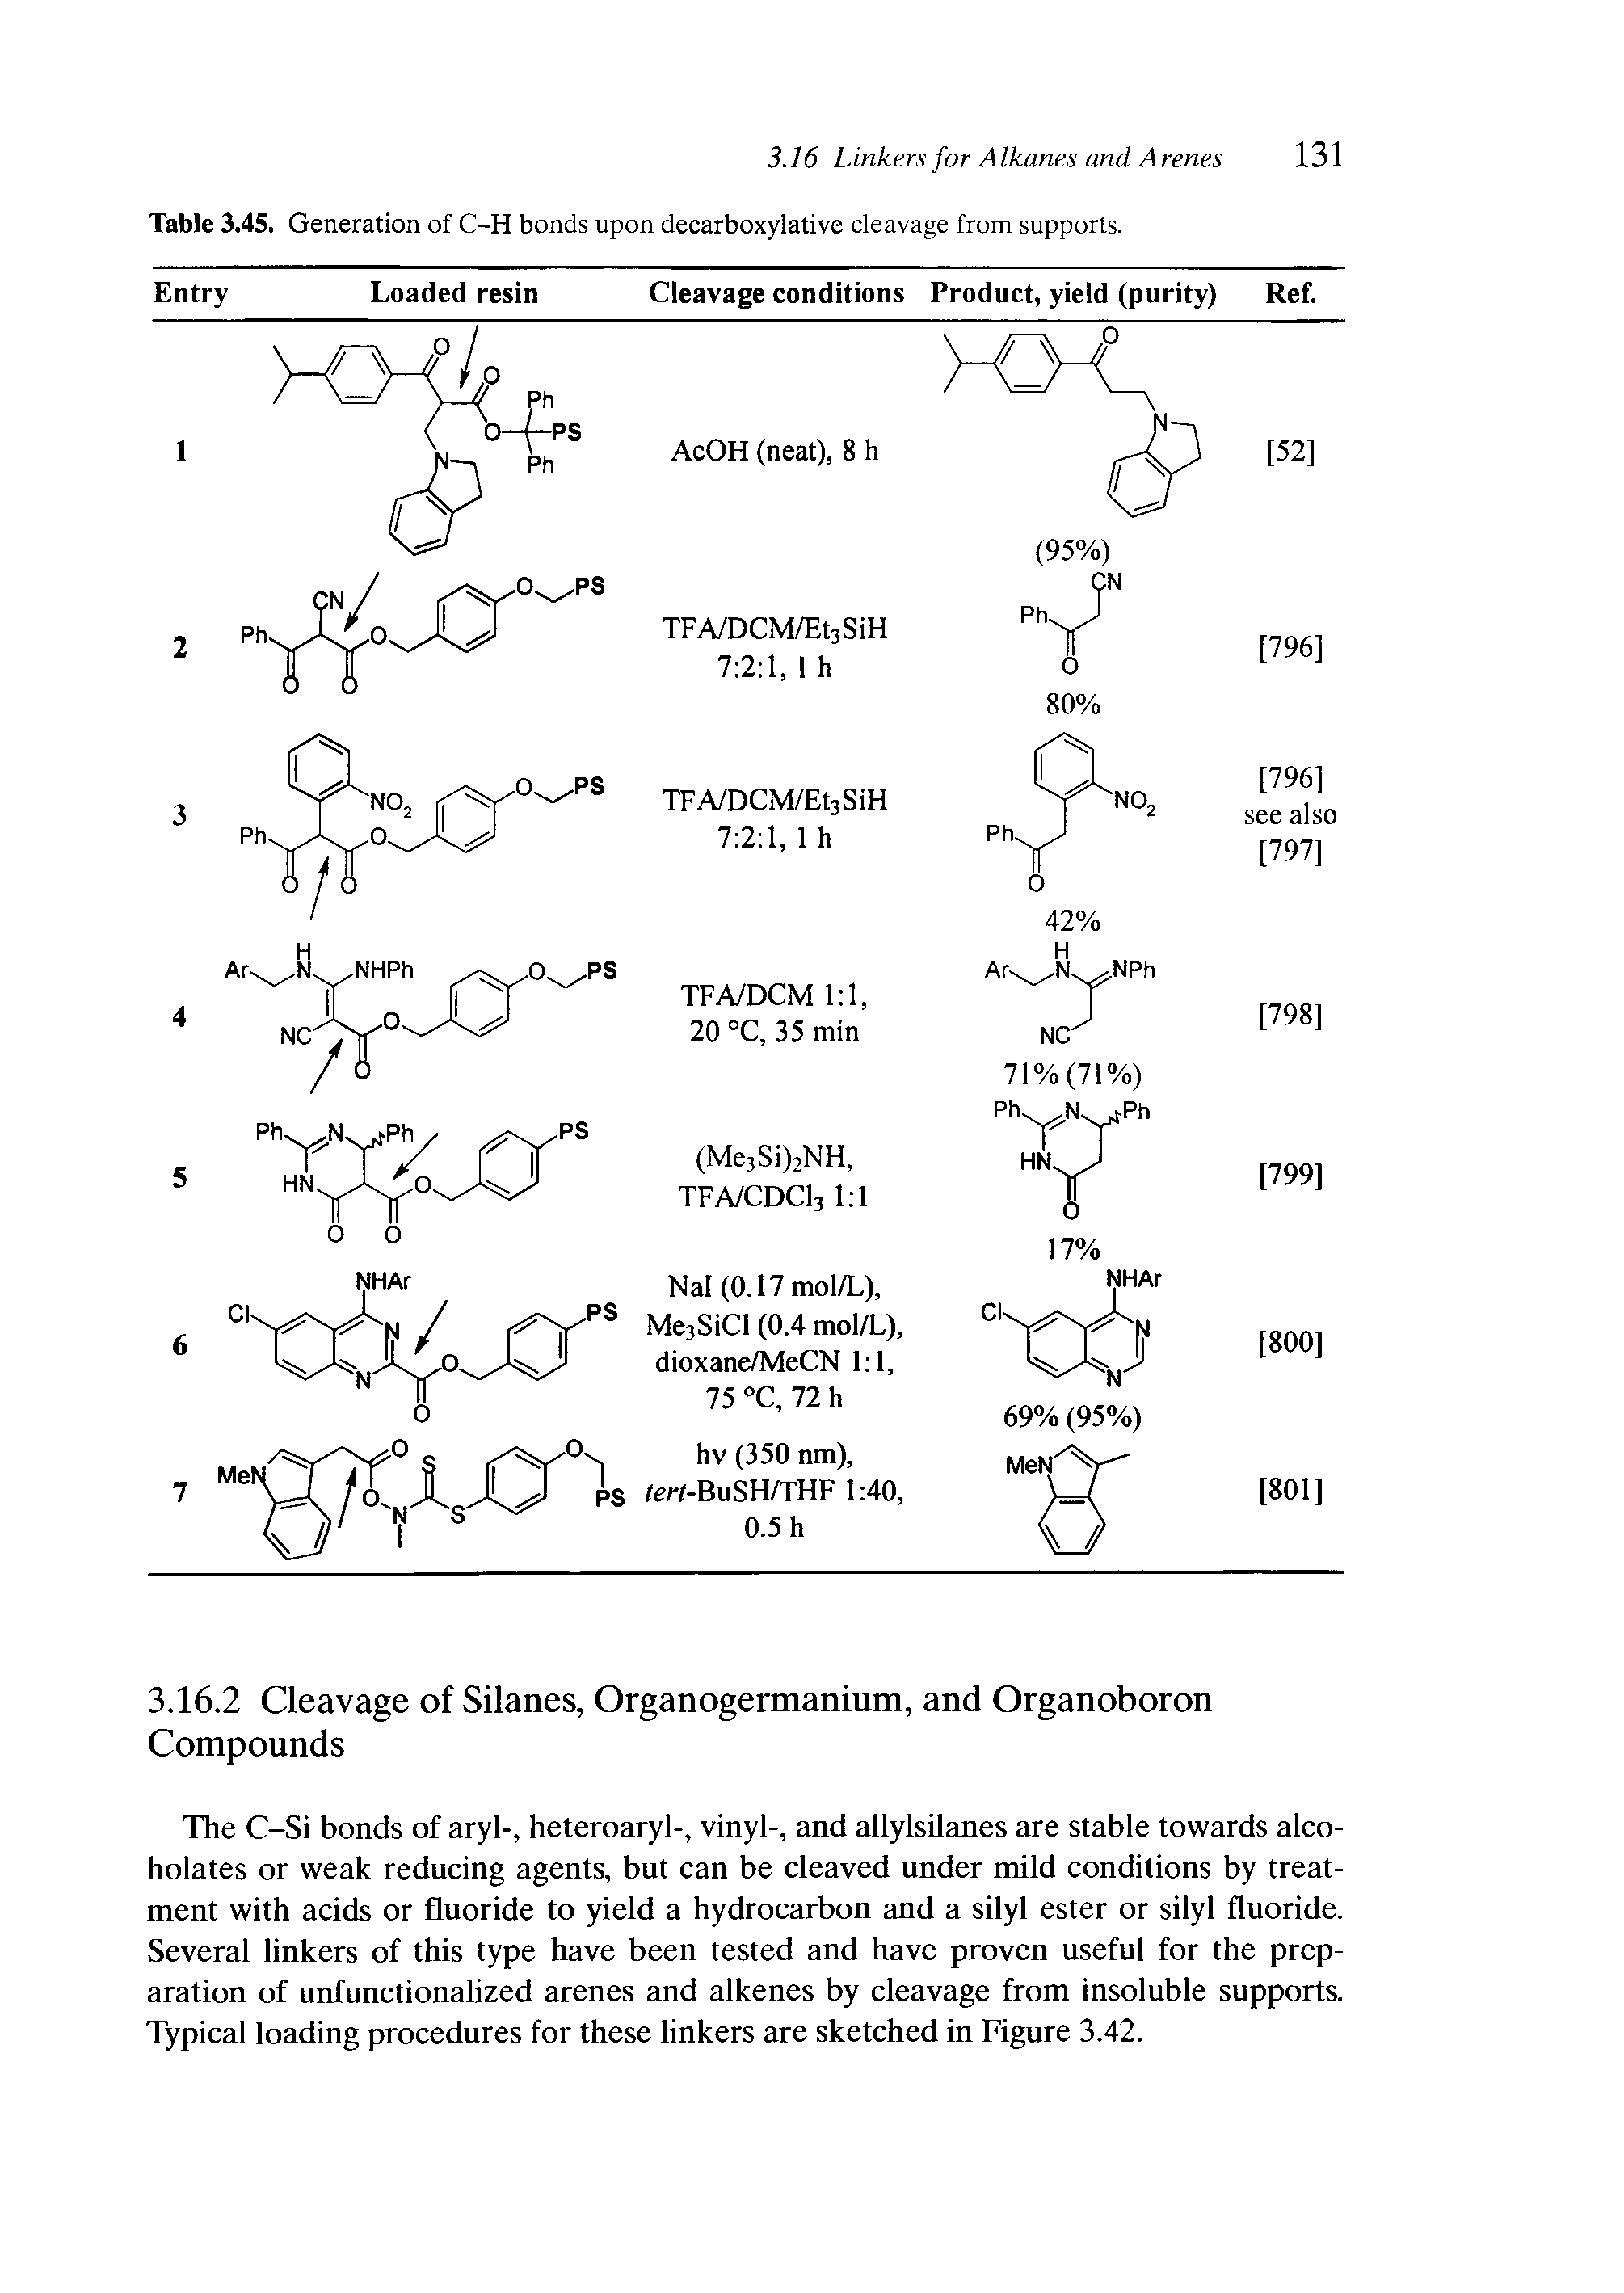 Table 3.45. Generation of C-H bonds upon decarboxylative cleavage from supports.